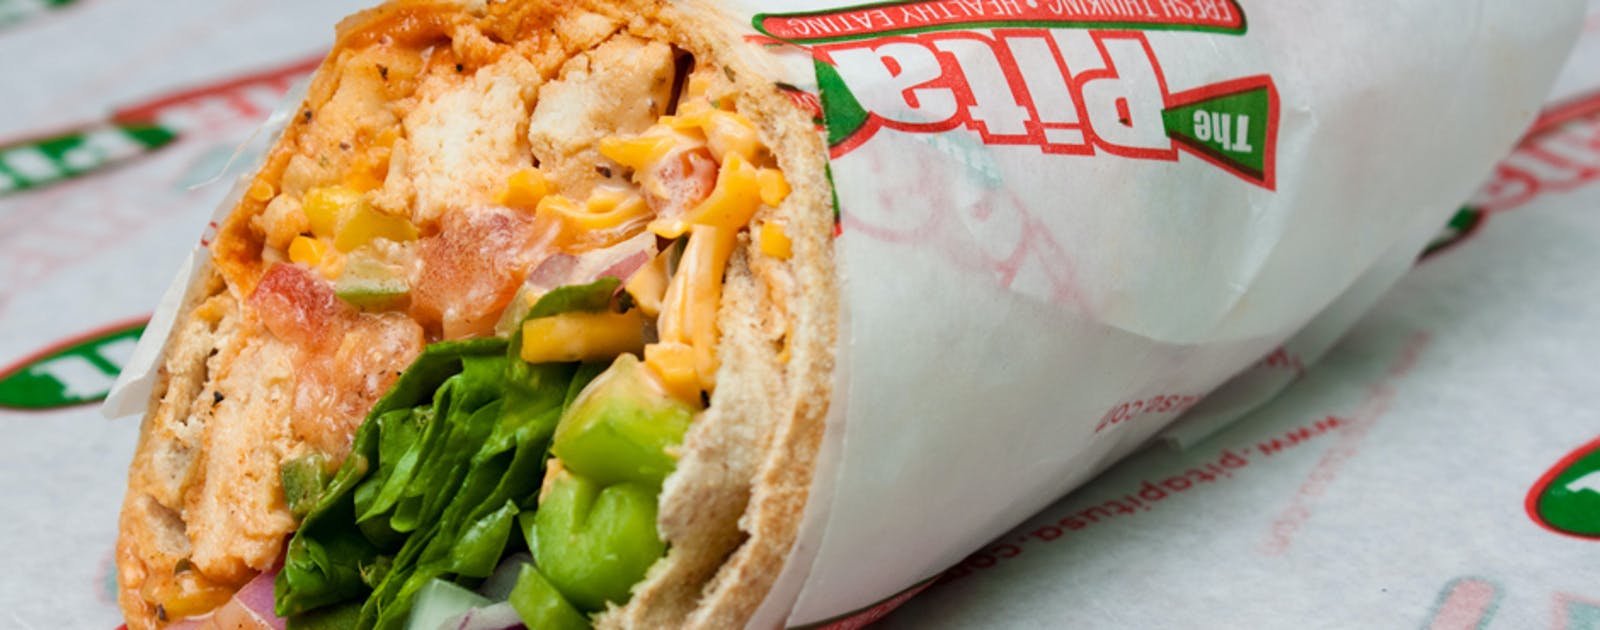 Pita Pit - Manly - Food Delivery Shop